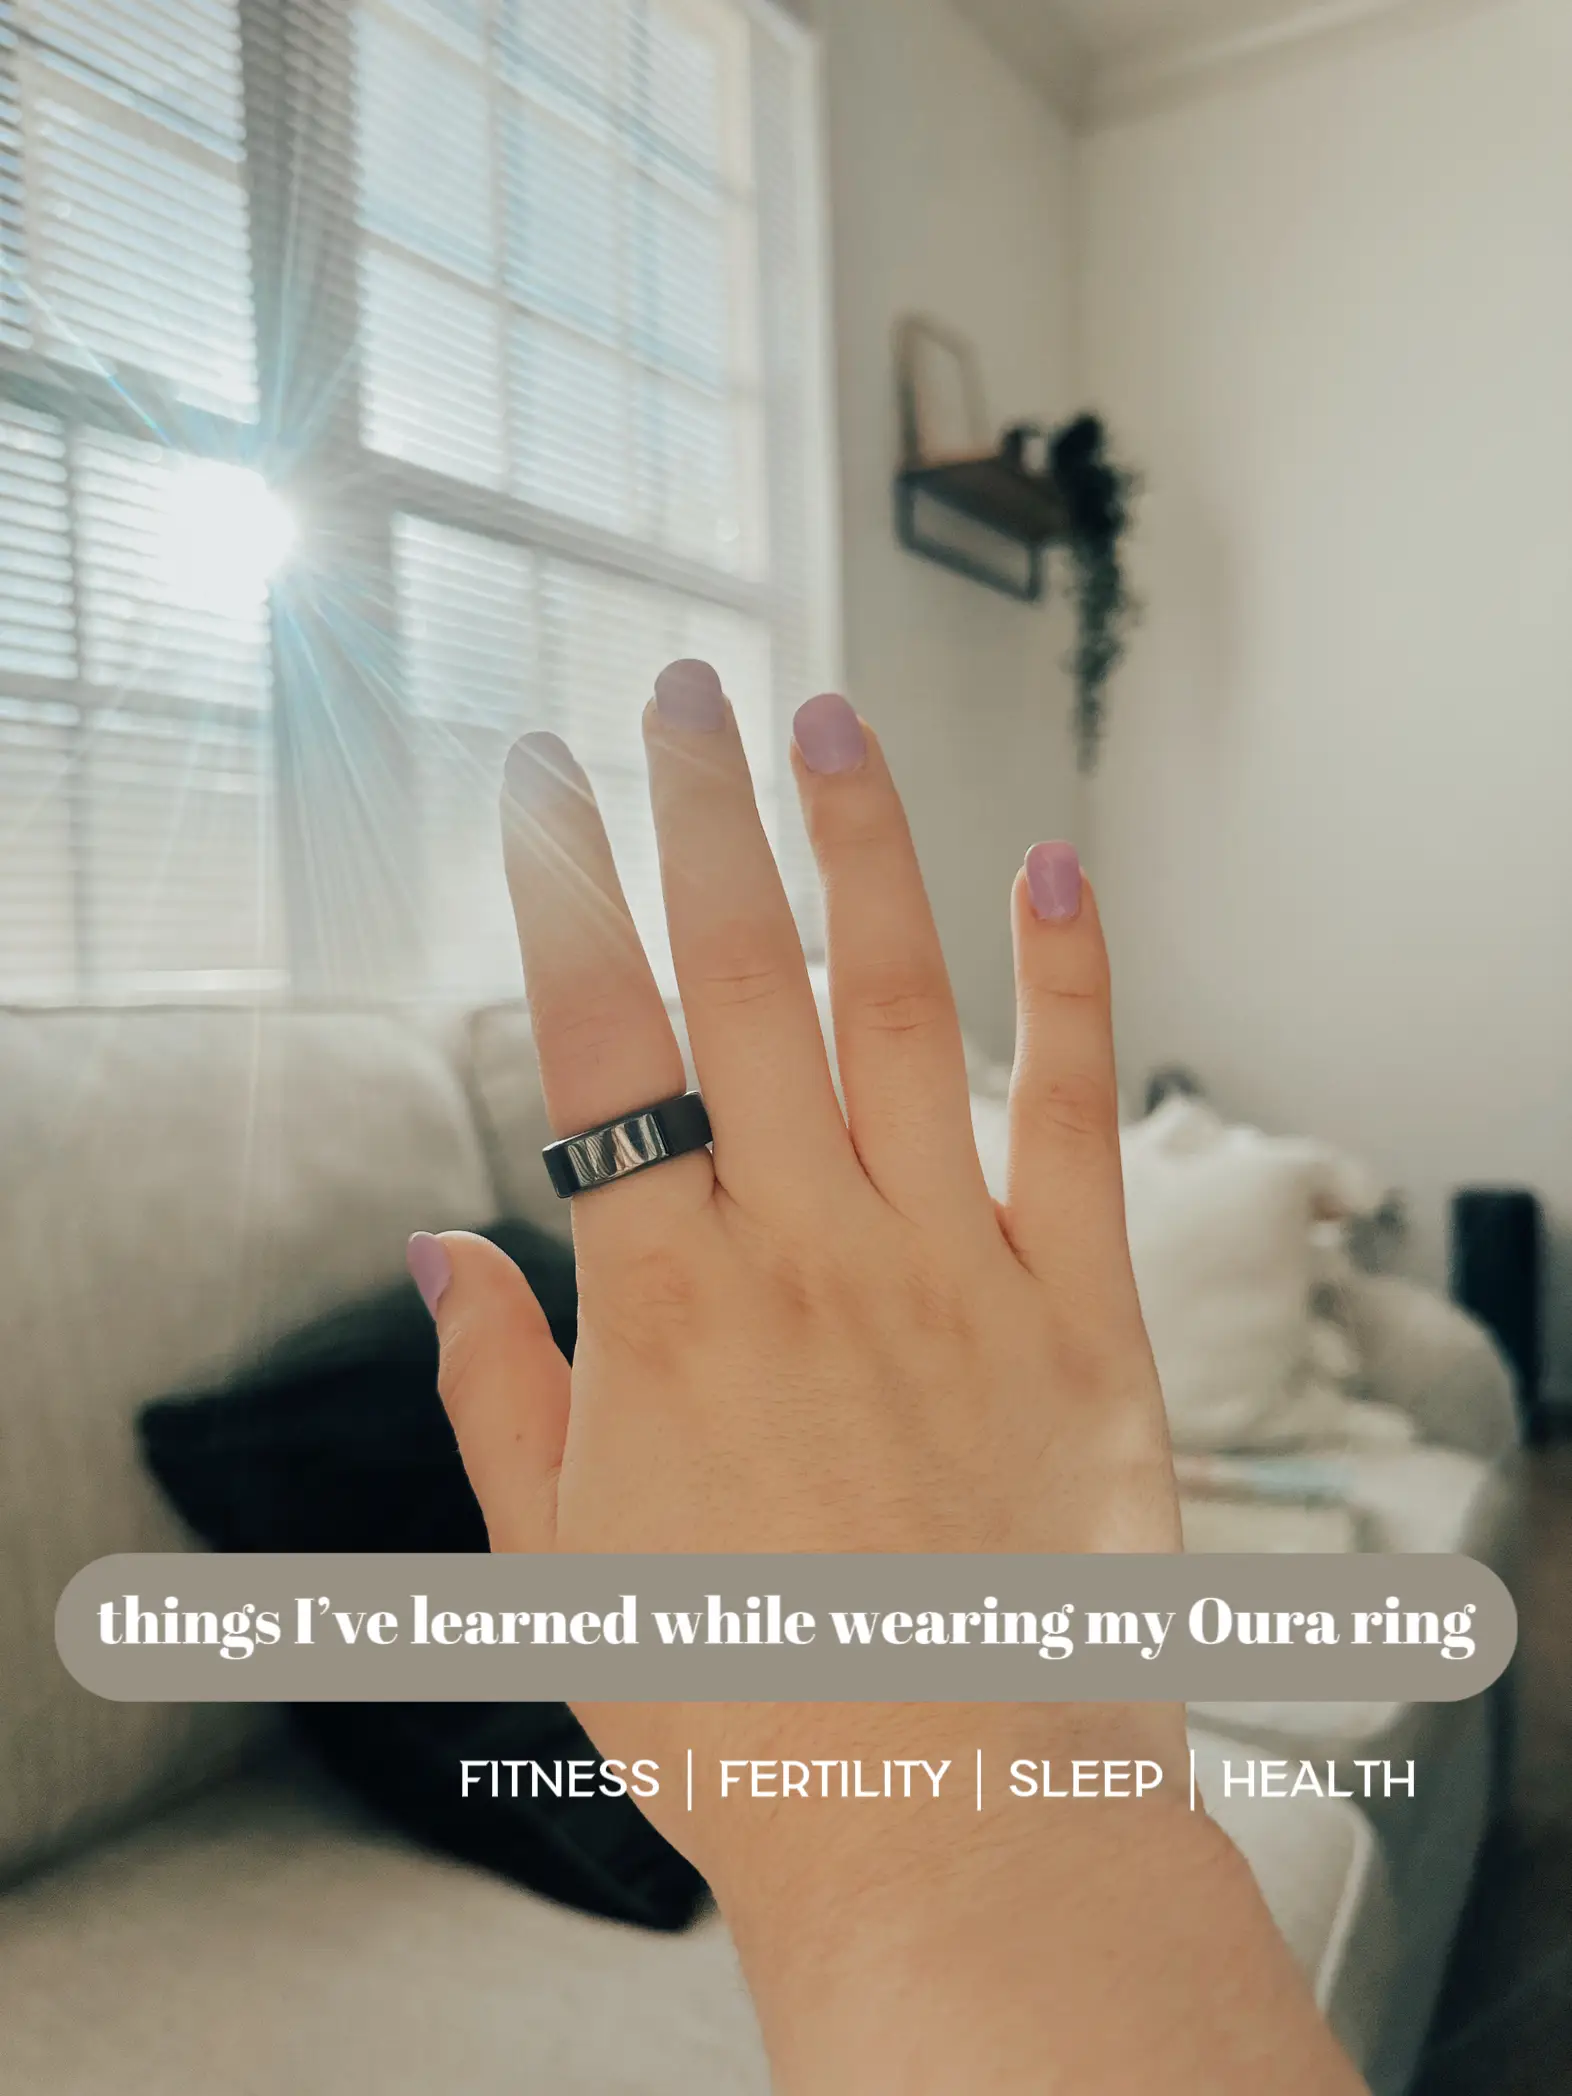 Small Fingers - What to do? : r/ouraring